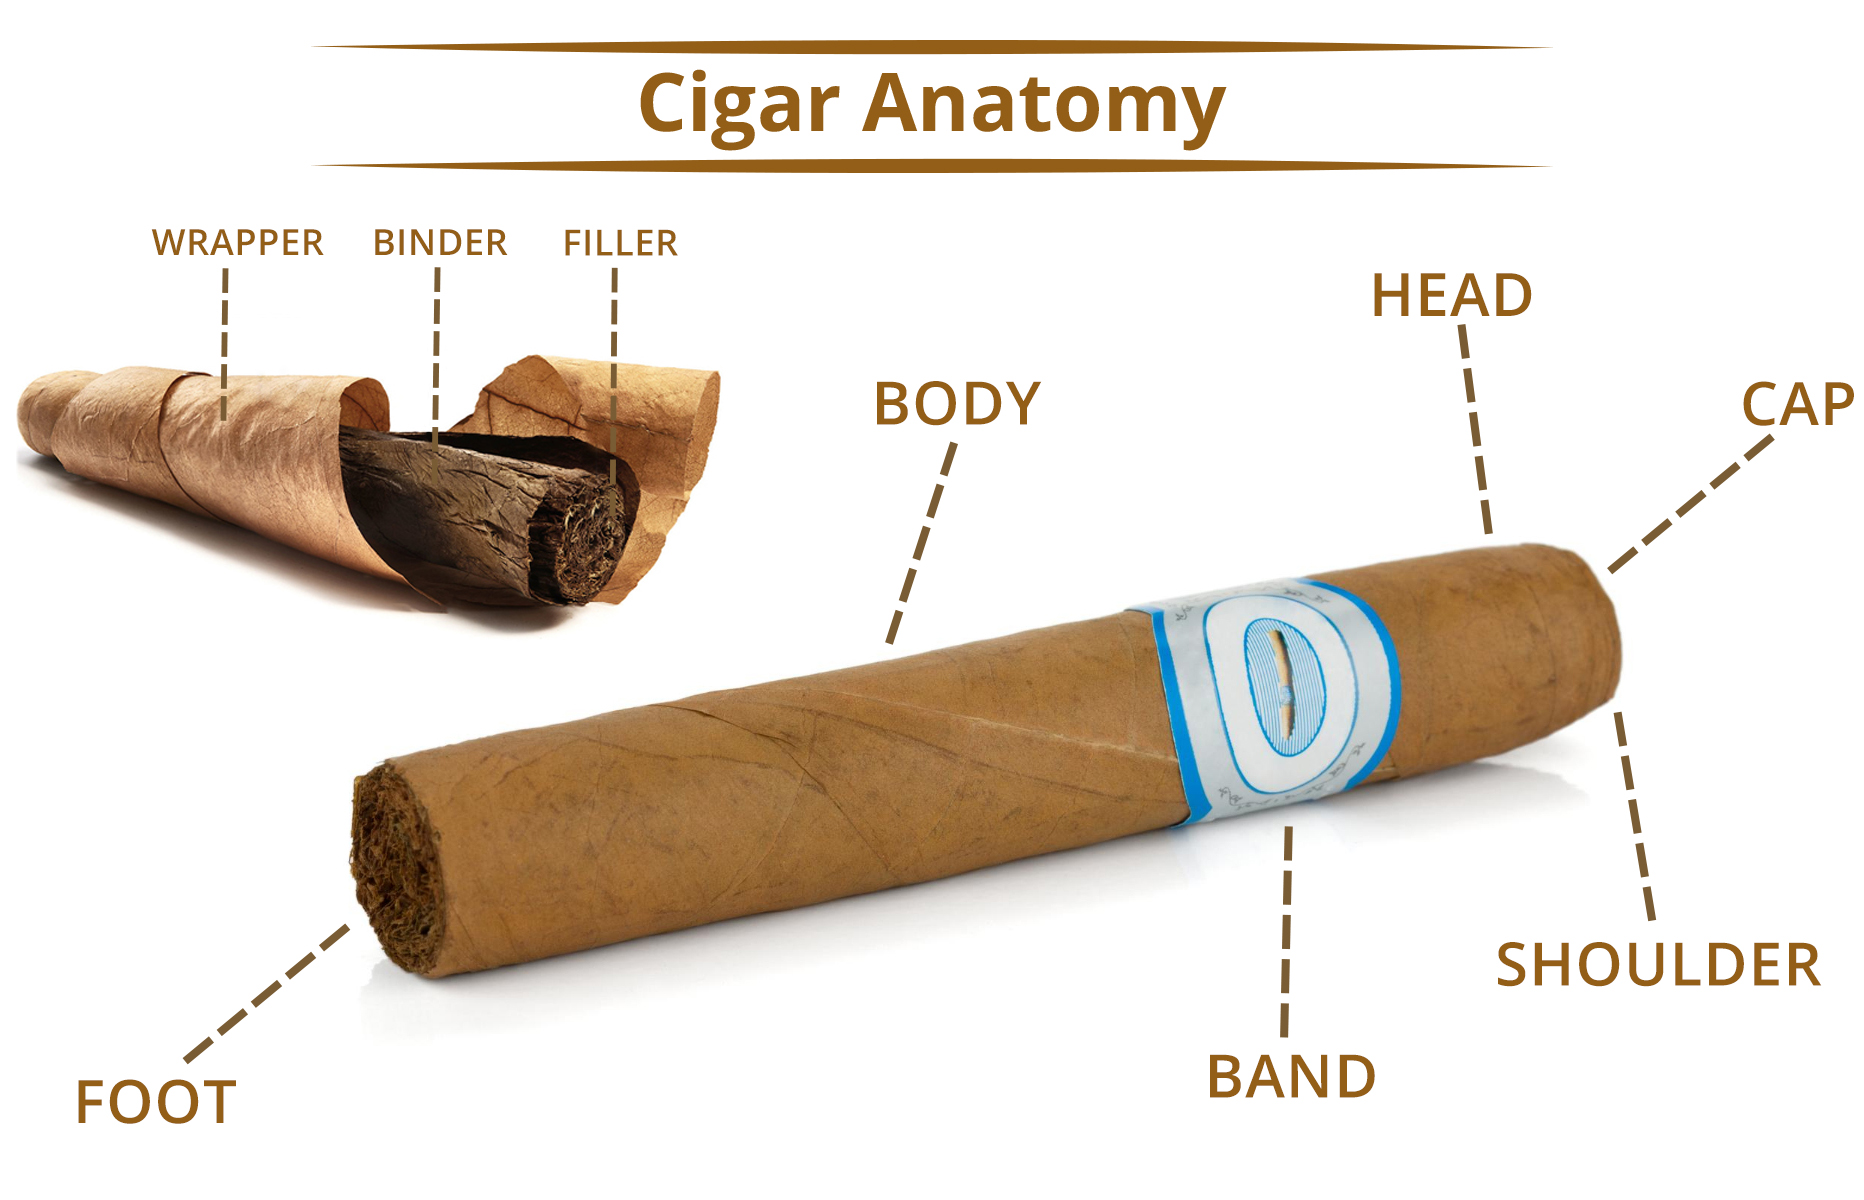 The wrapper leaf is the outermost part of a cigar's construction